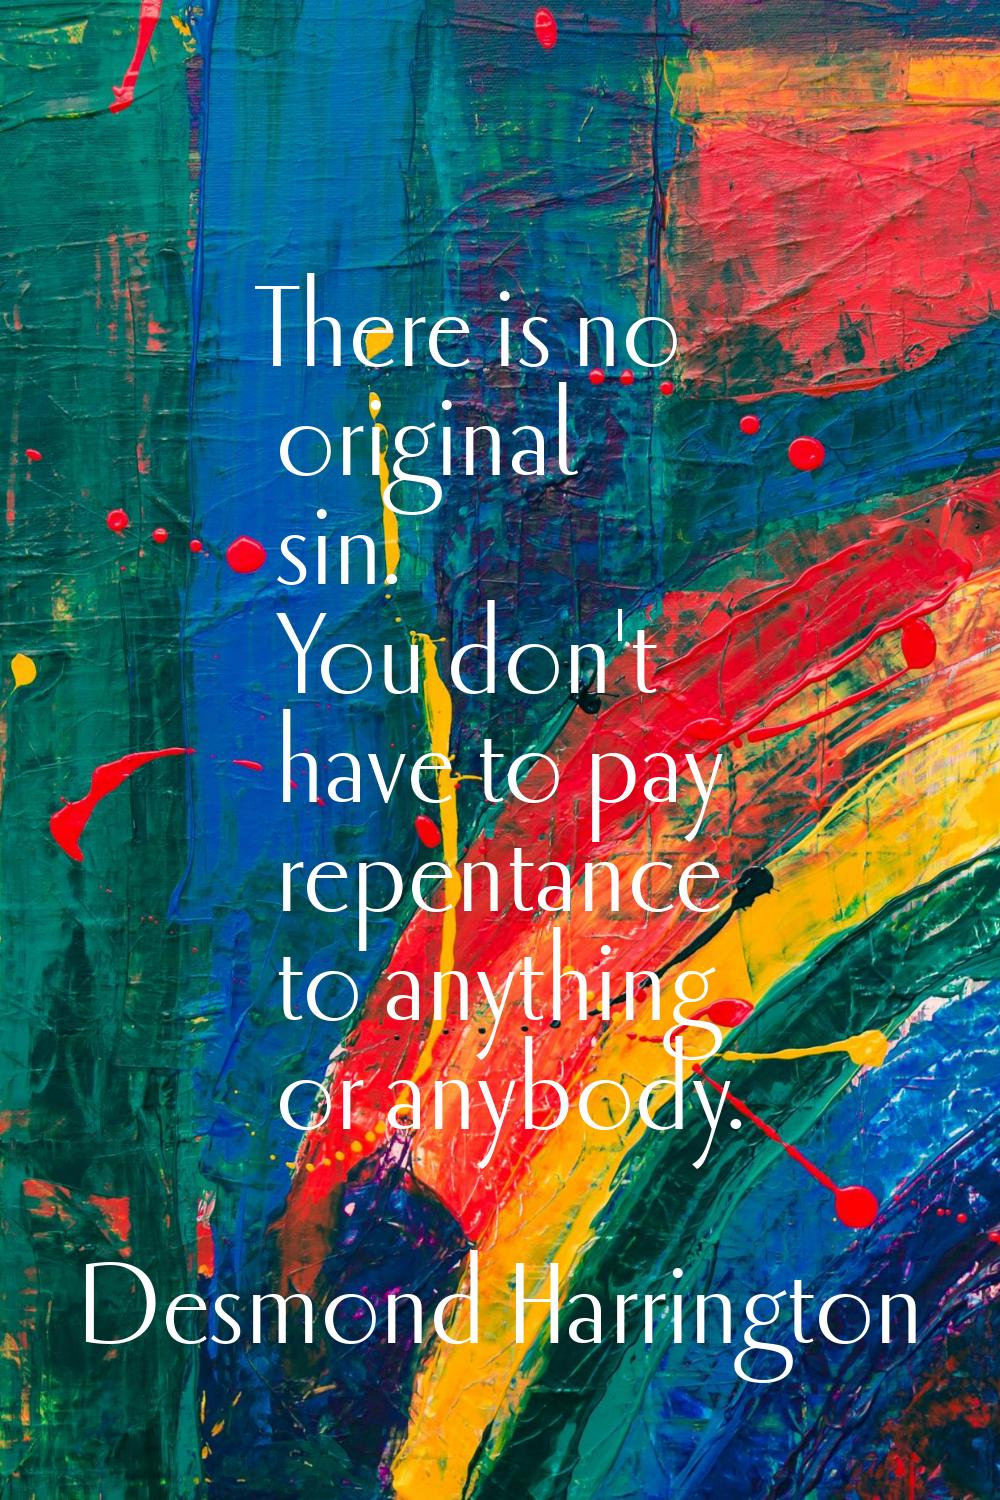 There is no original sin. You don't have to pay repentance to anything or anybody.